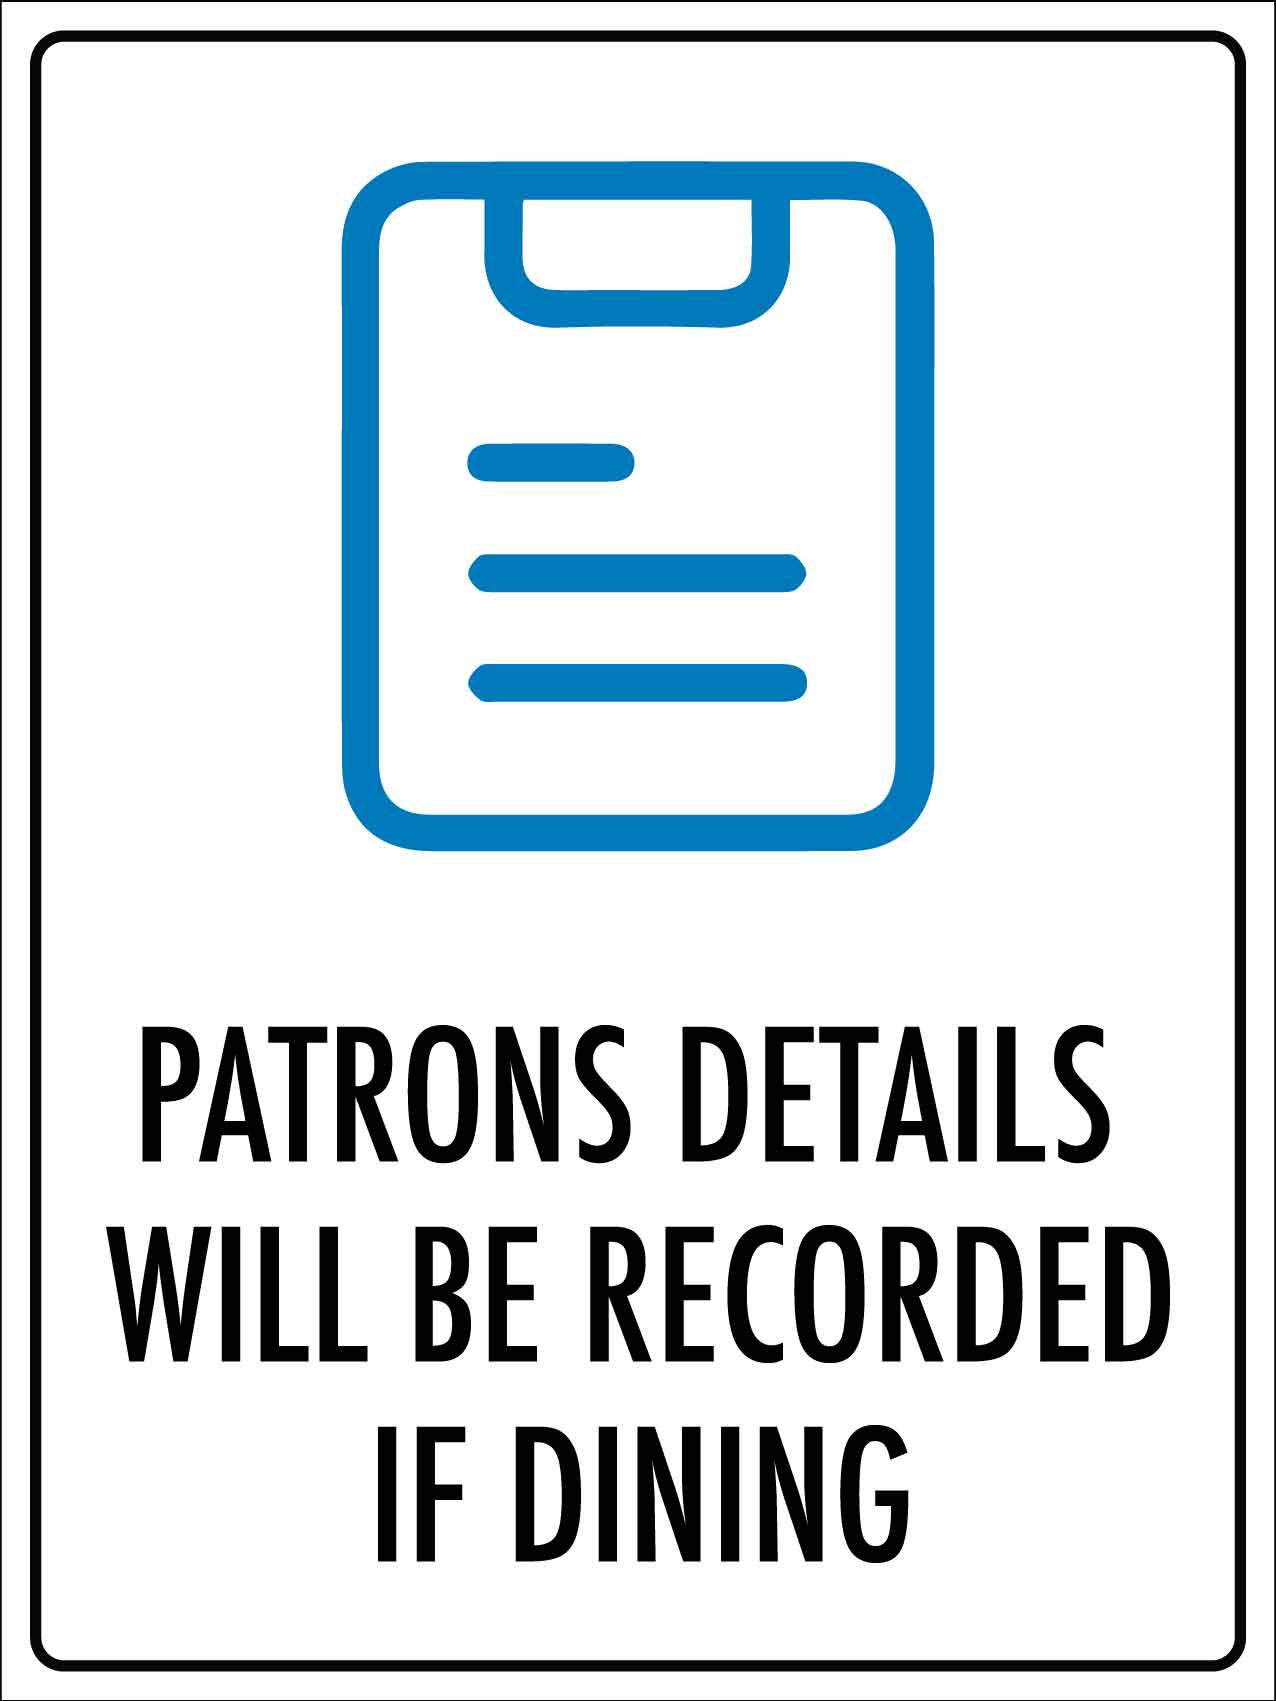 Patrons Details Will Be Recorded if Dining Sign